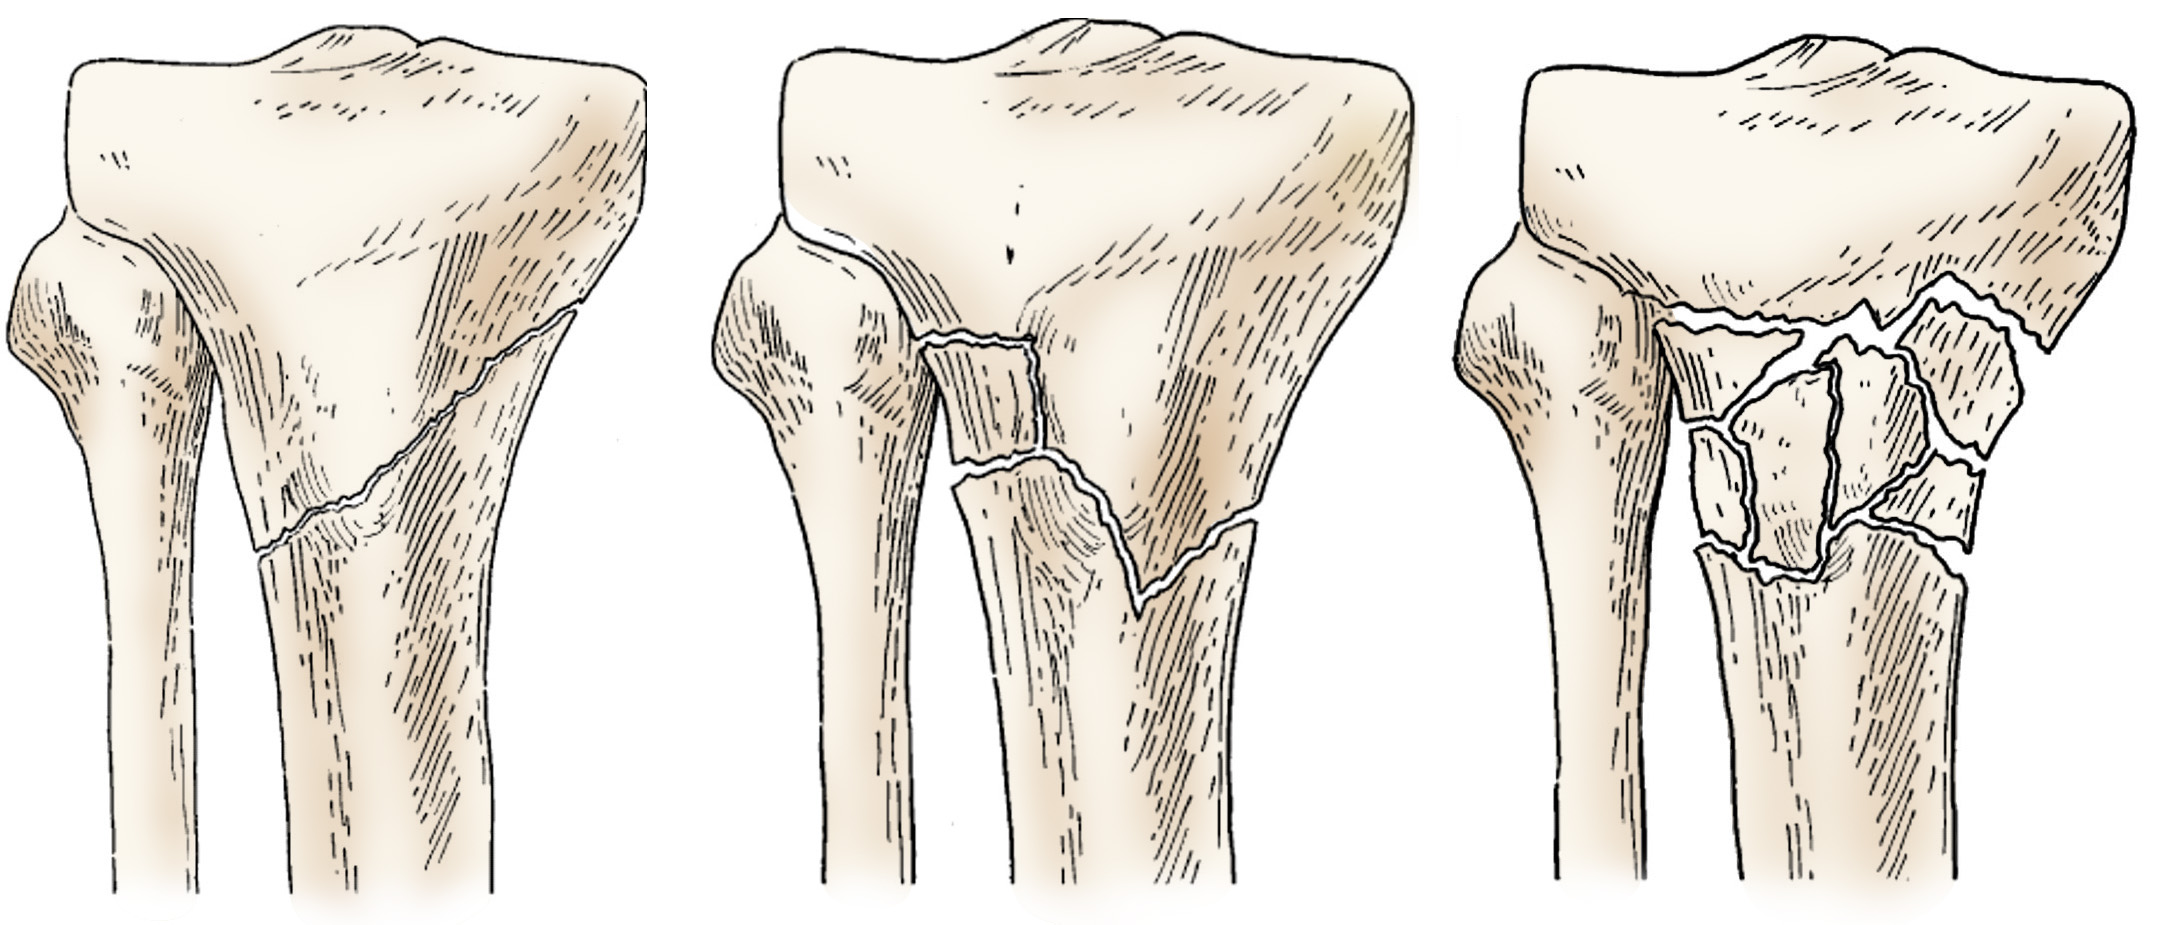 Illustration of different proximal tibia fractures